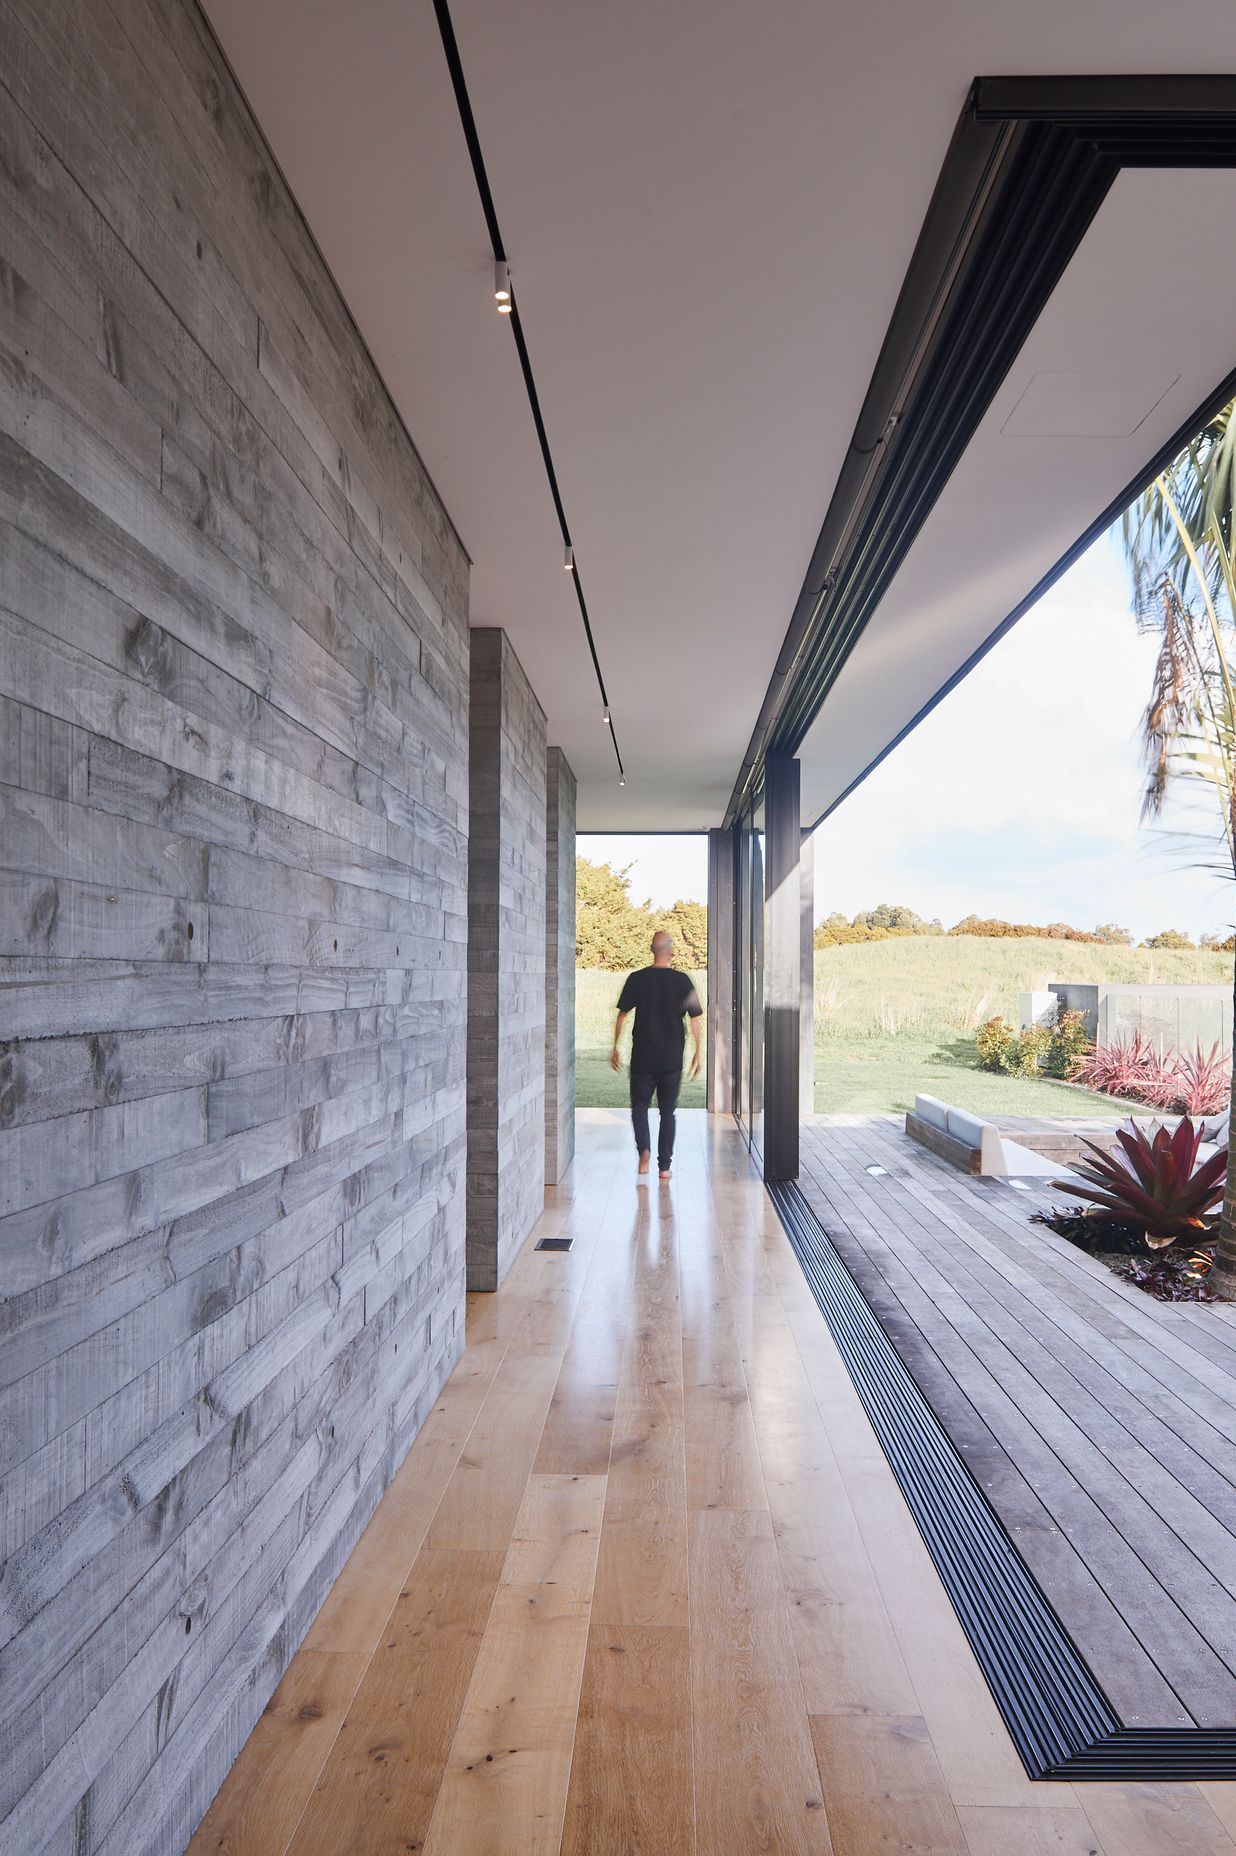 Full-width sliding doors help blur the lines between indoors and out, further enhanced by the textural nature of the chosen materials.